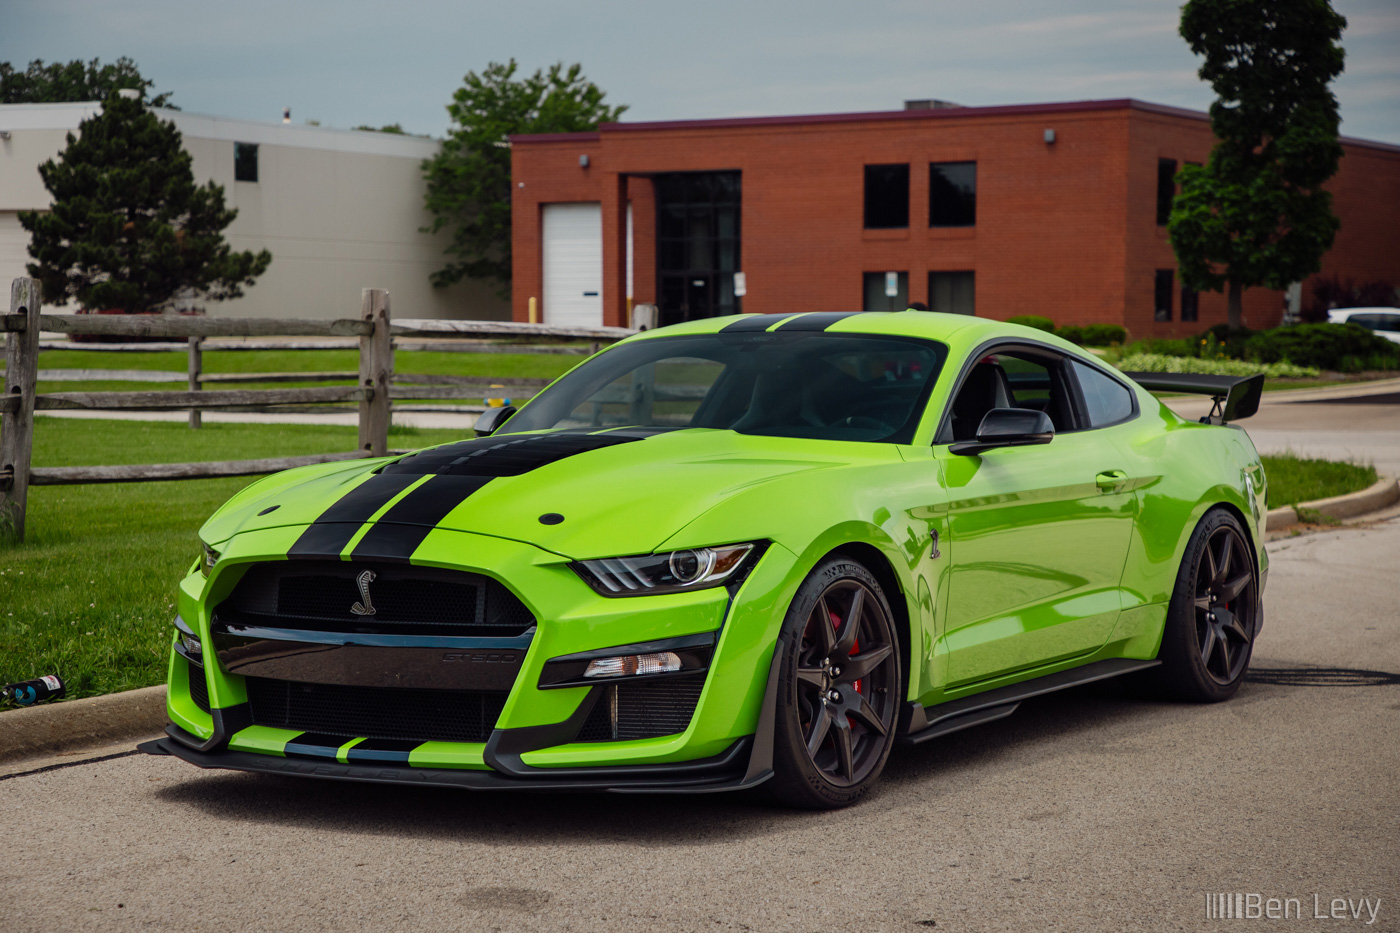 Green Ford Shelby GT500